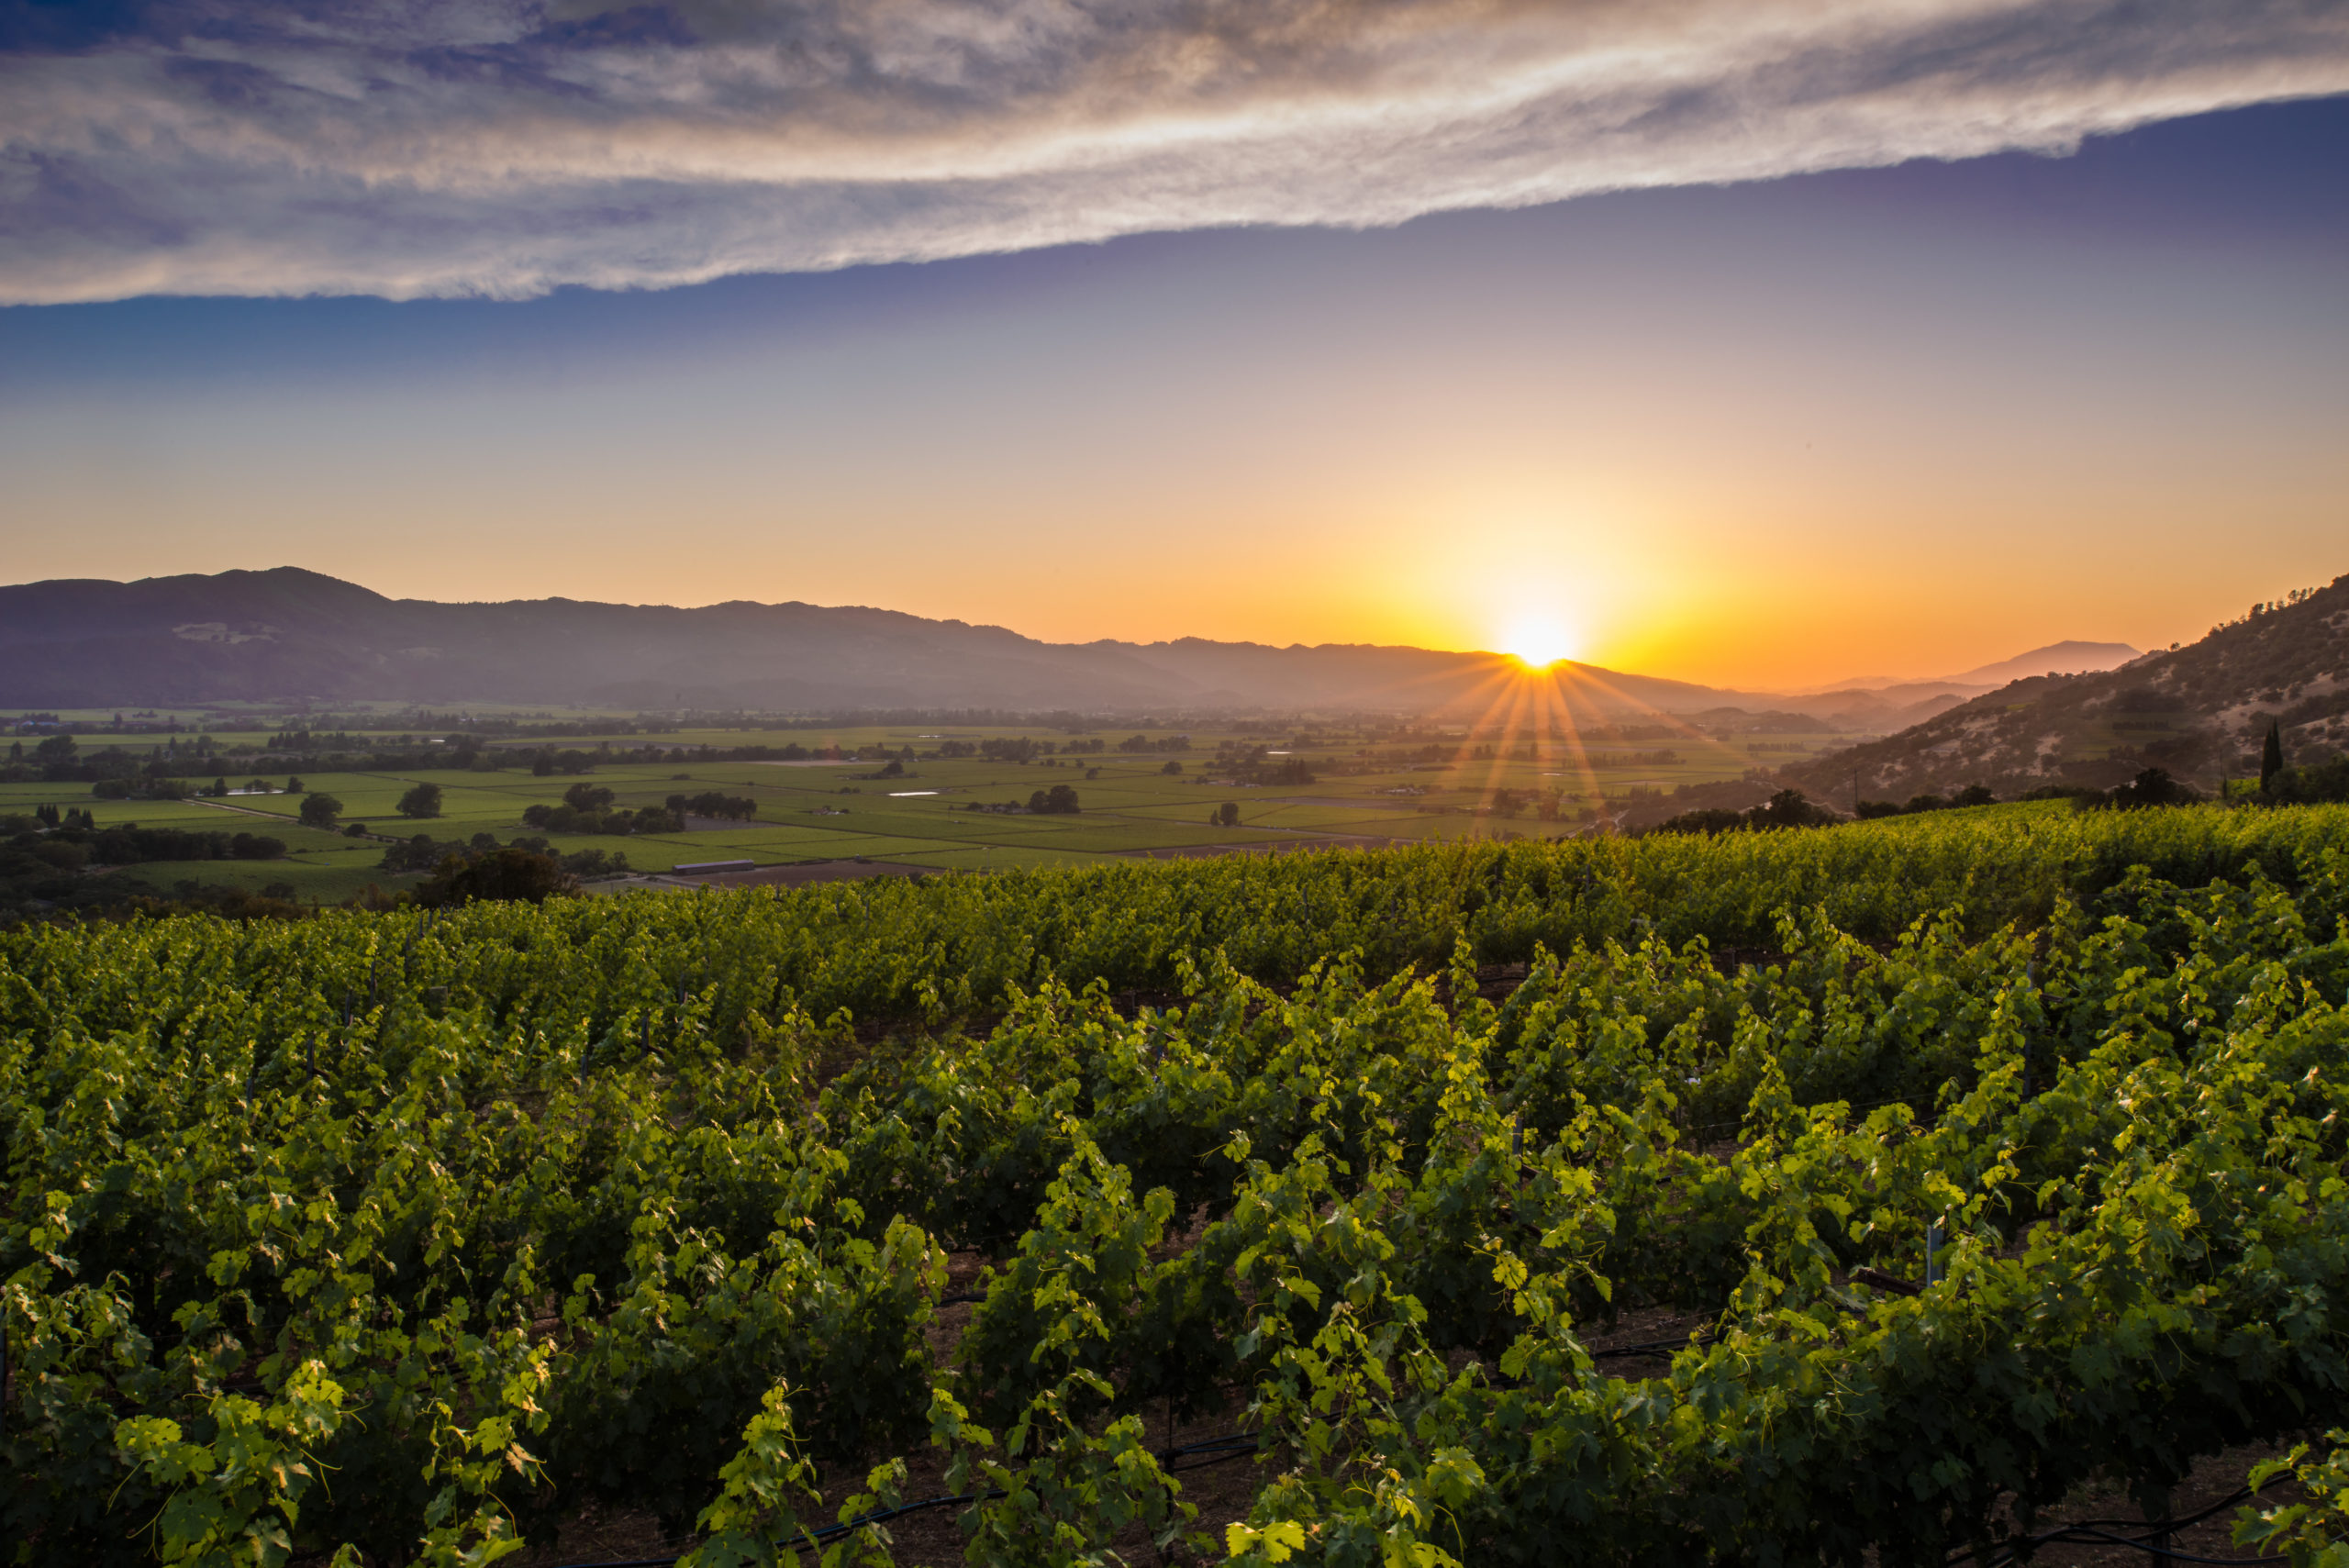 NAPA VALLEY WORLD-CLASS WINE TOURISM THEN & NOW